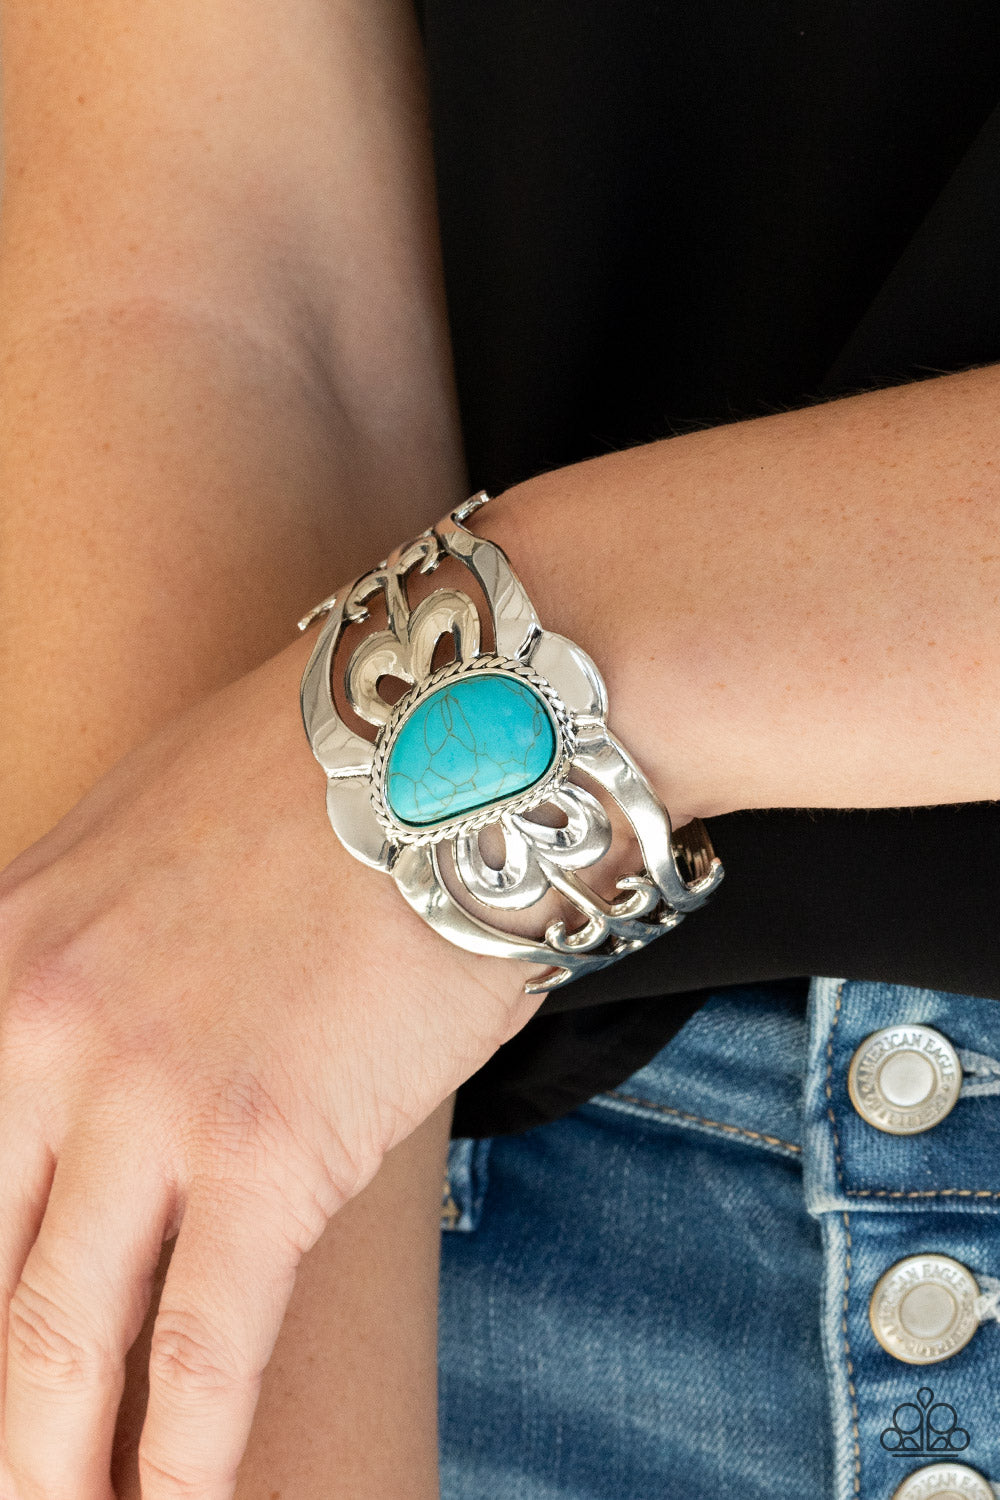 The MESAS are Calling Blue Bracelet Paparazzi Accessories Cuff Style $5 Jewelry. Get Free Shipping!